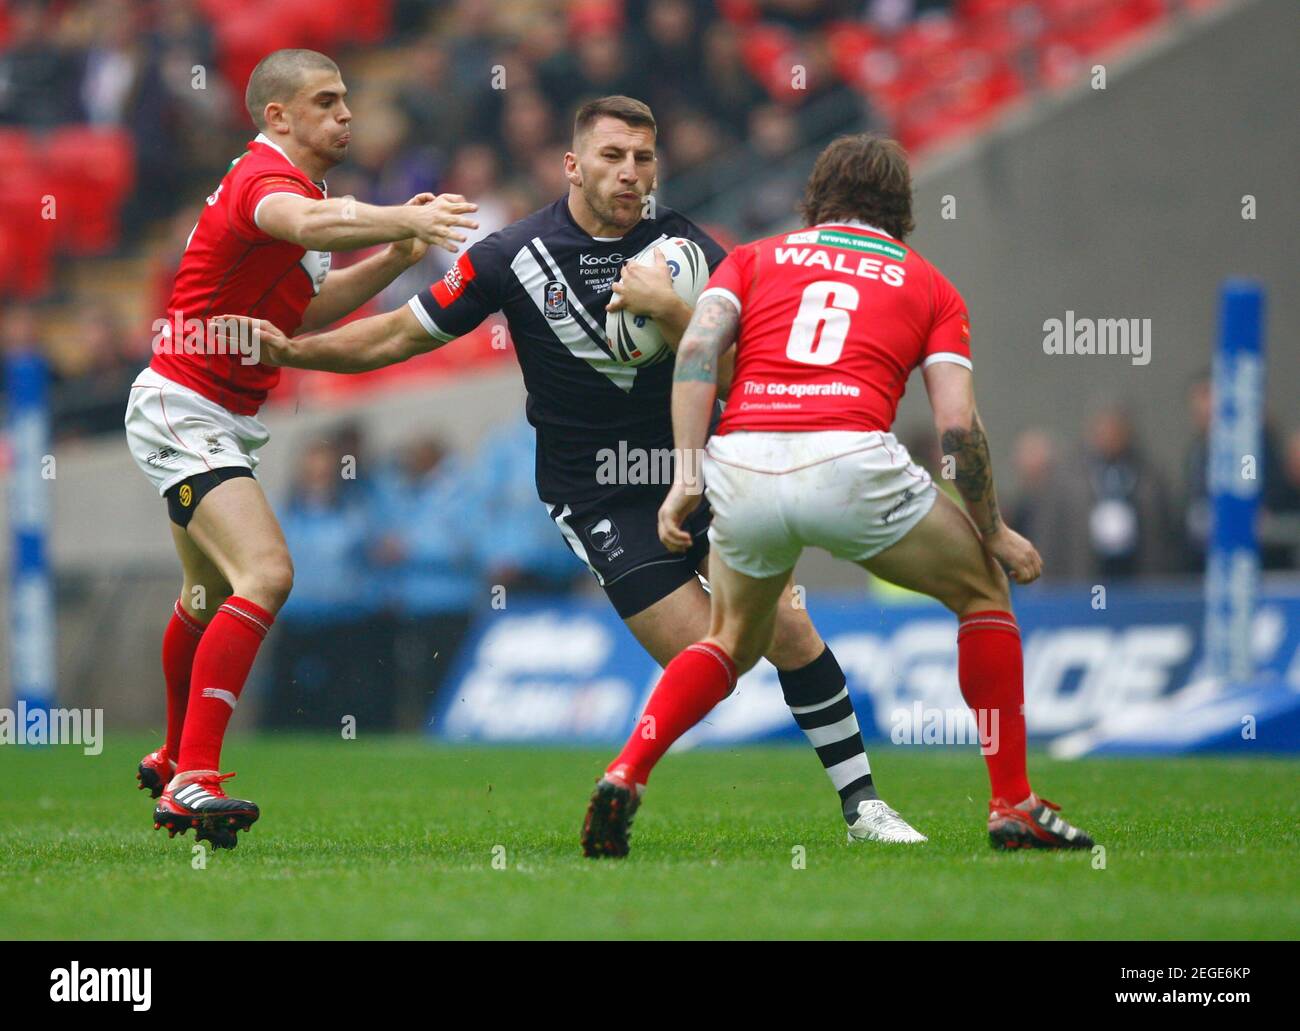 Rugby League - Wales v New Zealand - Gillette Four Nations 2011 - Wembley Stadium - 5/11/11  New Zealand's Lewis Brown (C) in action  Mandatory Credit: Action Images / Peter Cziborra Stock Photo